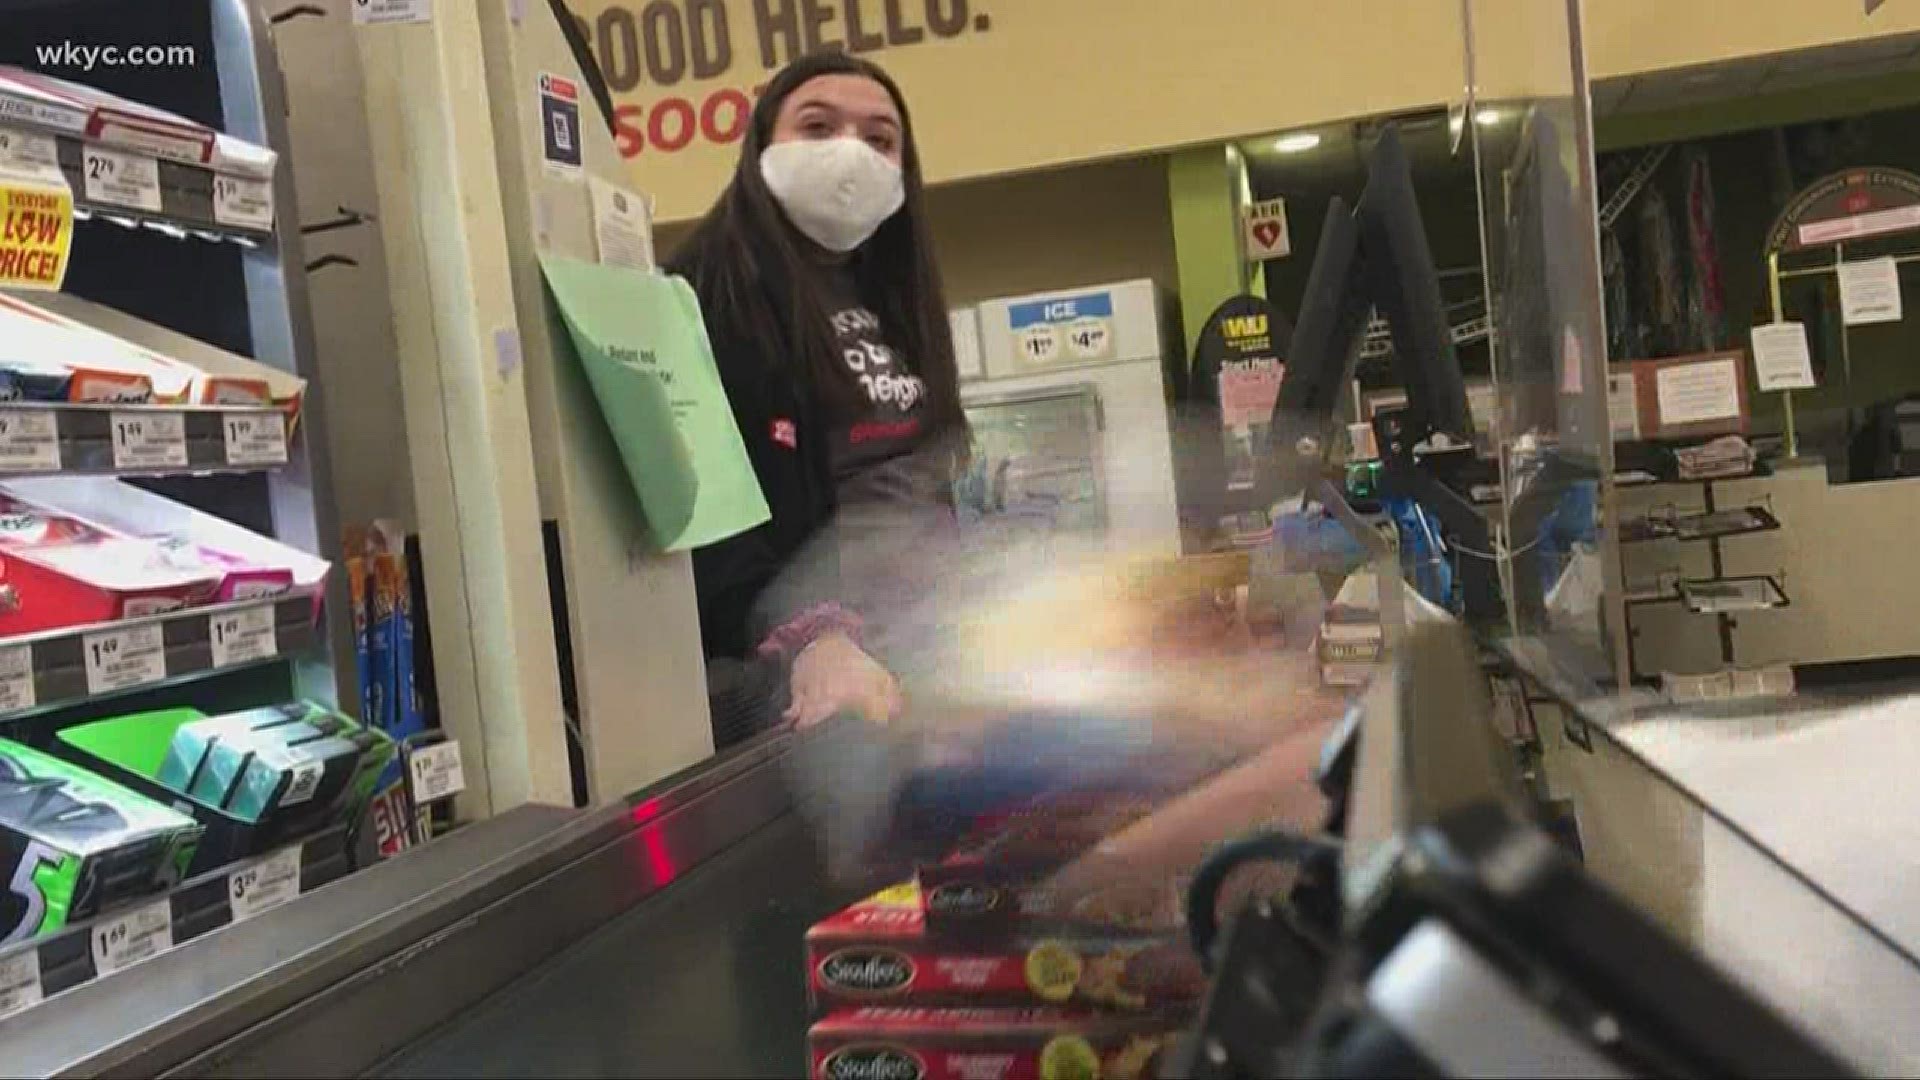 3News Investigates went undercover, visiting ten local grocery stores, and evaluating them in four different categories. Rachel Polansky explains the findings.